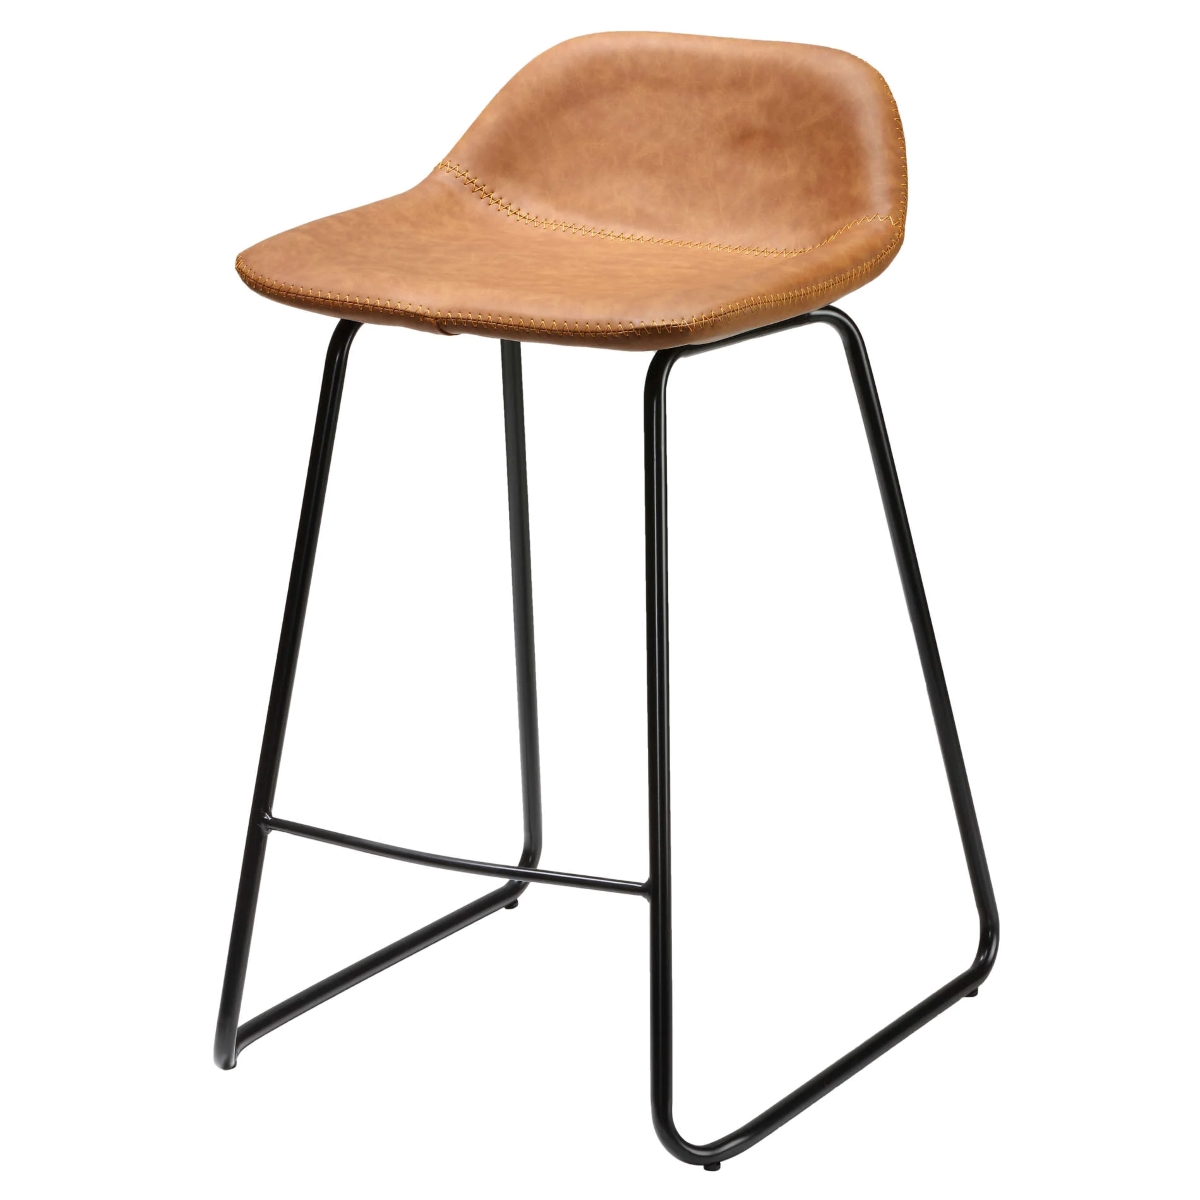 Brown faux leather counter stool with thin metal frame.